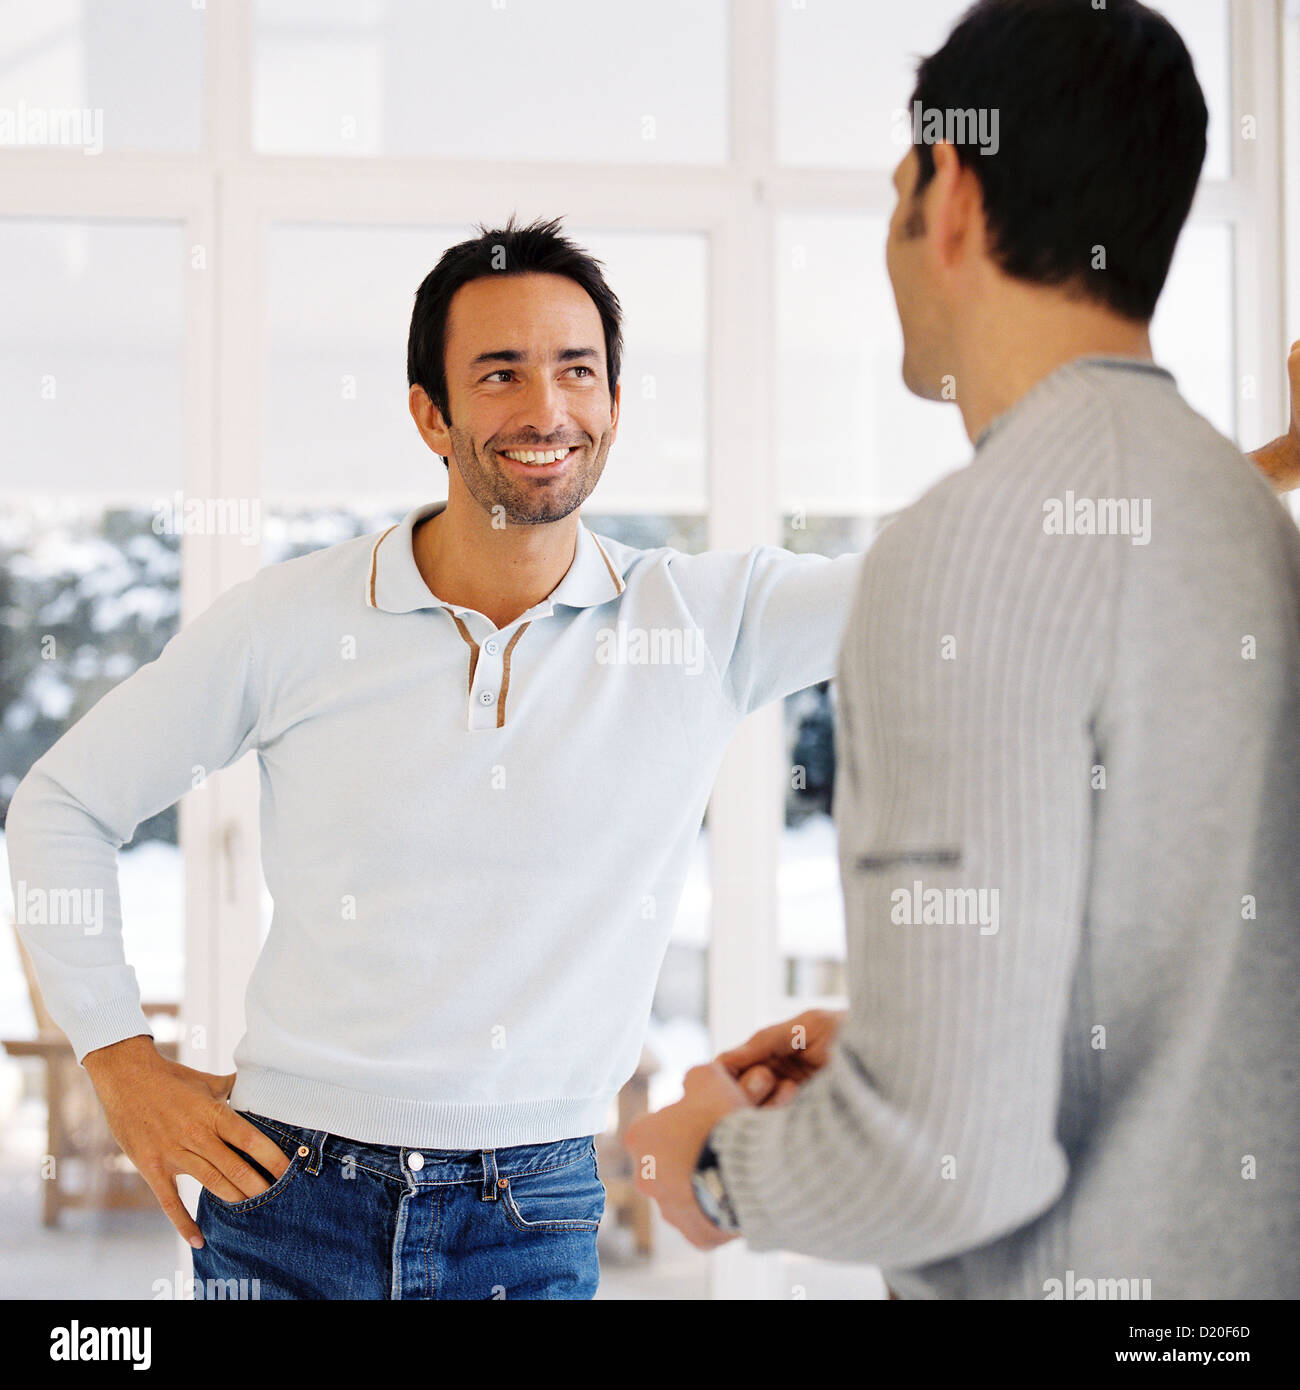 Two men talking to each other License free except ads and billboards Stock Photo